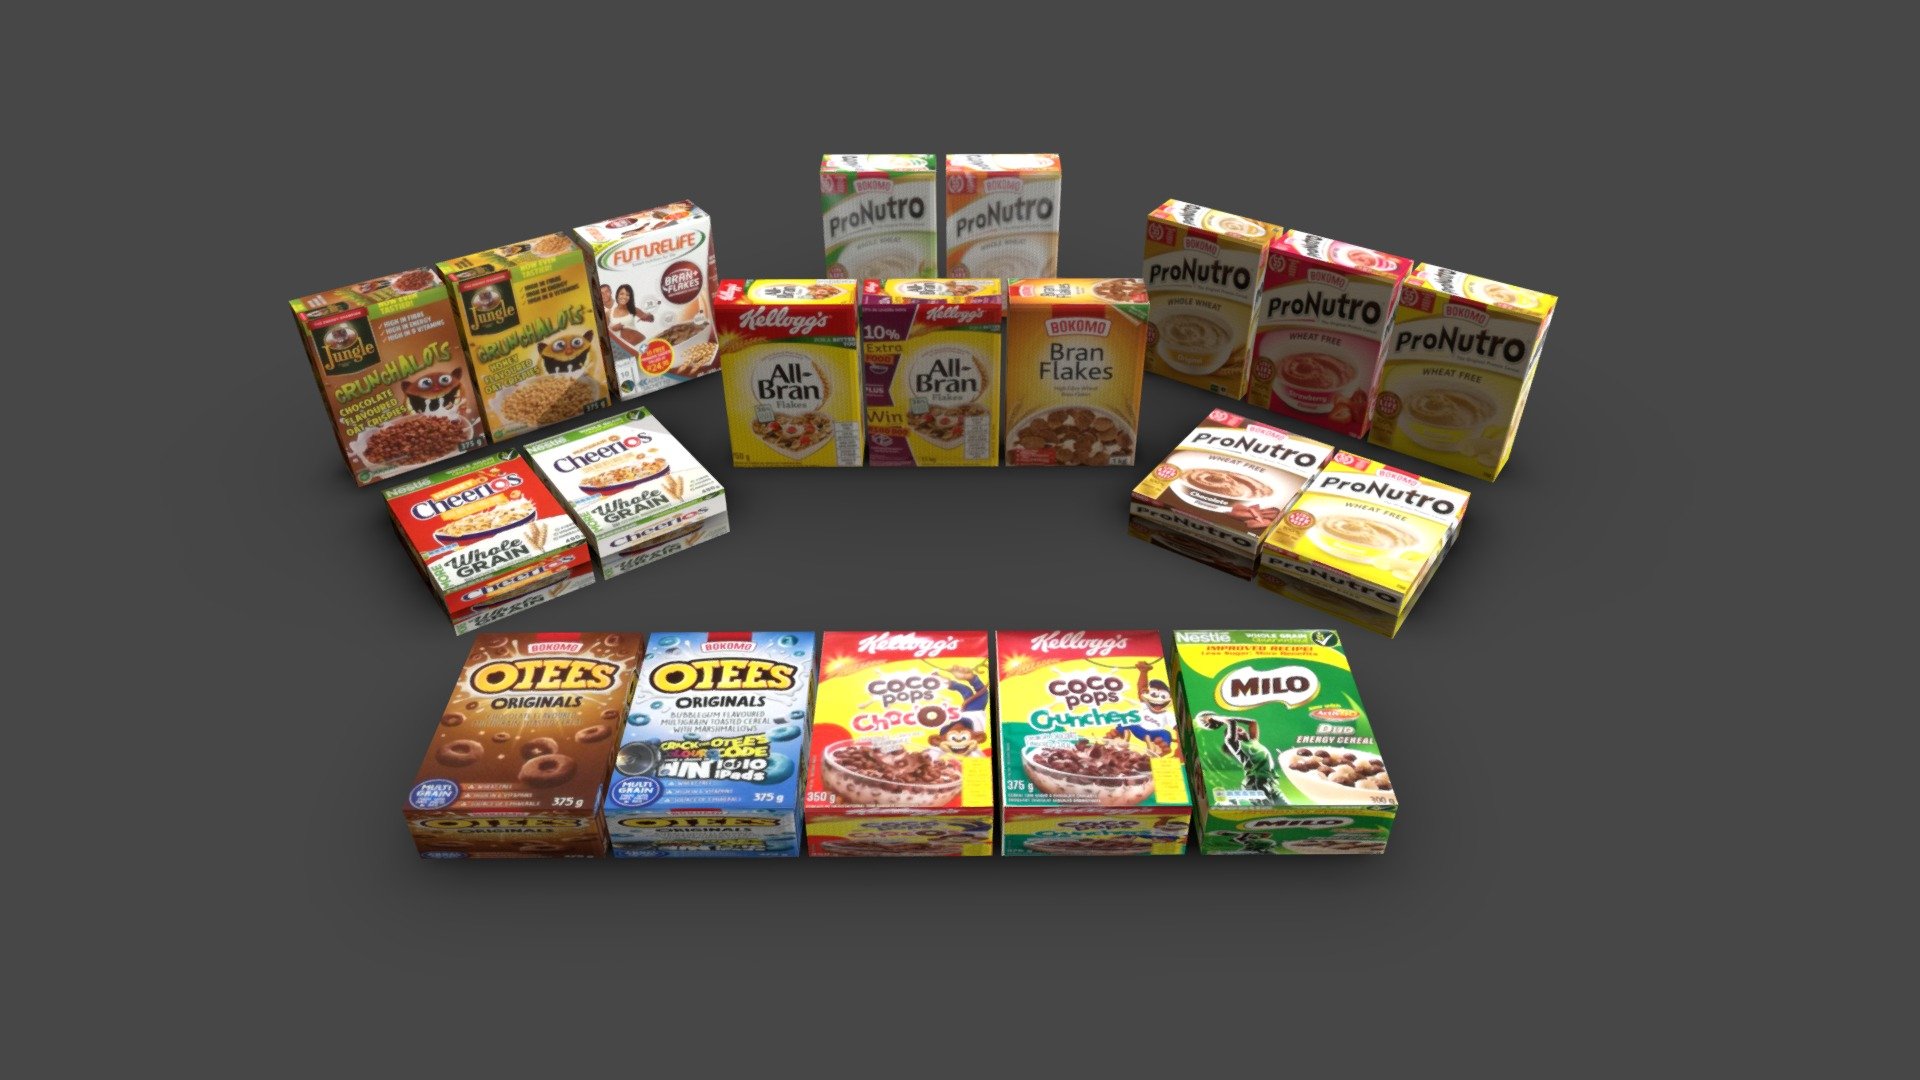 This is a collection od 20 cereal boxes on shelf. Create in store supermarket 3d scenes and environments quickly. Visualize shop interiors. it is low poly so VR friendly

Format: Blender - Native
Max 2015
FBX - Exported from max

Materials: Blender - Principaled Max - Standard

Scale 1:1

UVWs: Unwrapped, Mixed

The cereal brands are: kelloggs All Bran Bokomo Bran flakes Bokomo Pronutro Bokomo Otees Kelloggs Coco pops Nestle milo Nestle Cheerios Jungle Oats Crunchalots Futurelife - Standard Cereal Store Shelf - Buy Royalty Free 3D model by 3D Content Online (@hknoblauch) 3d model